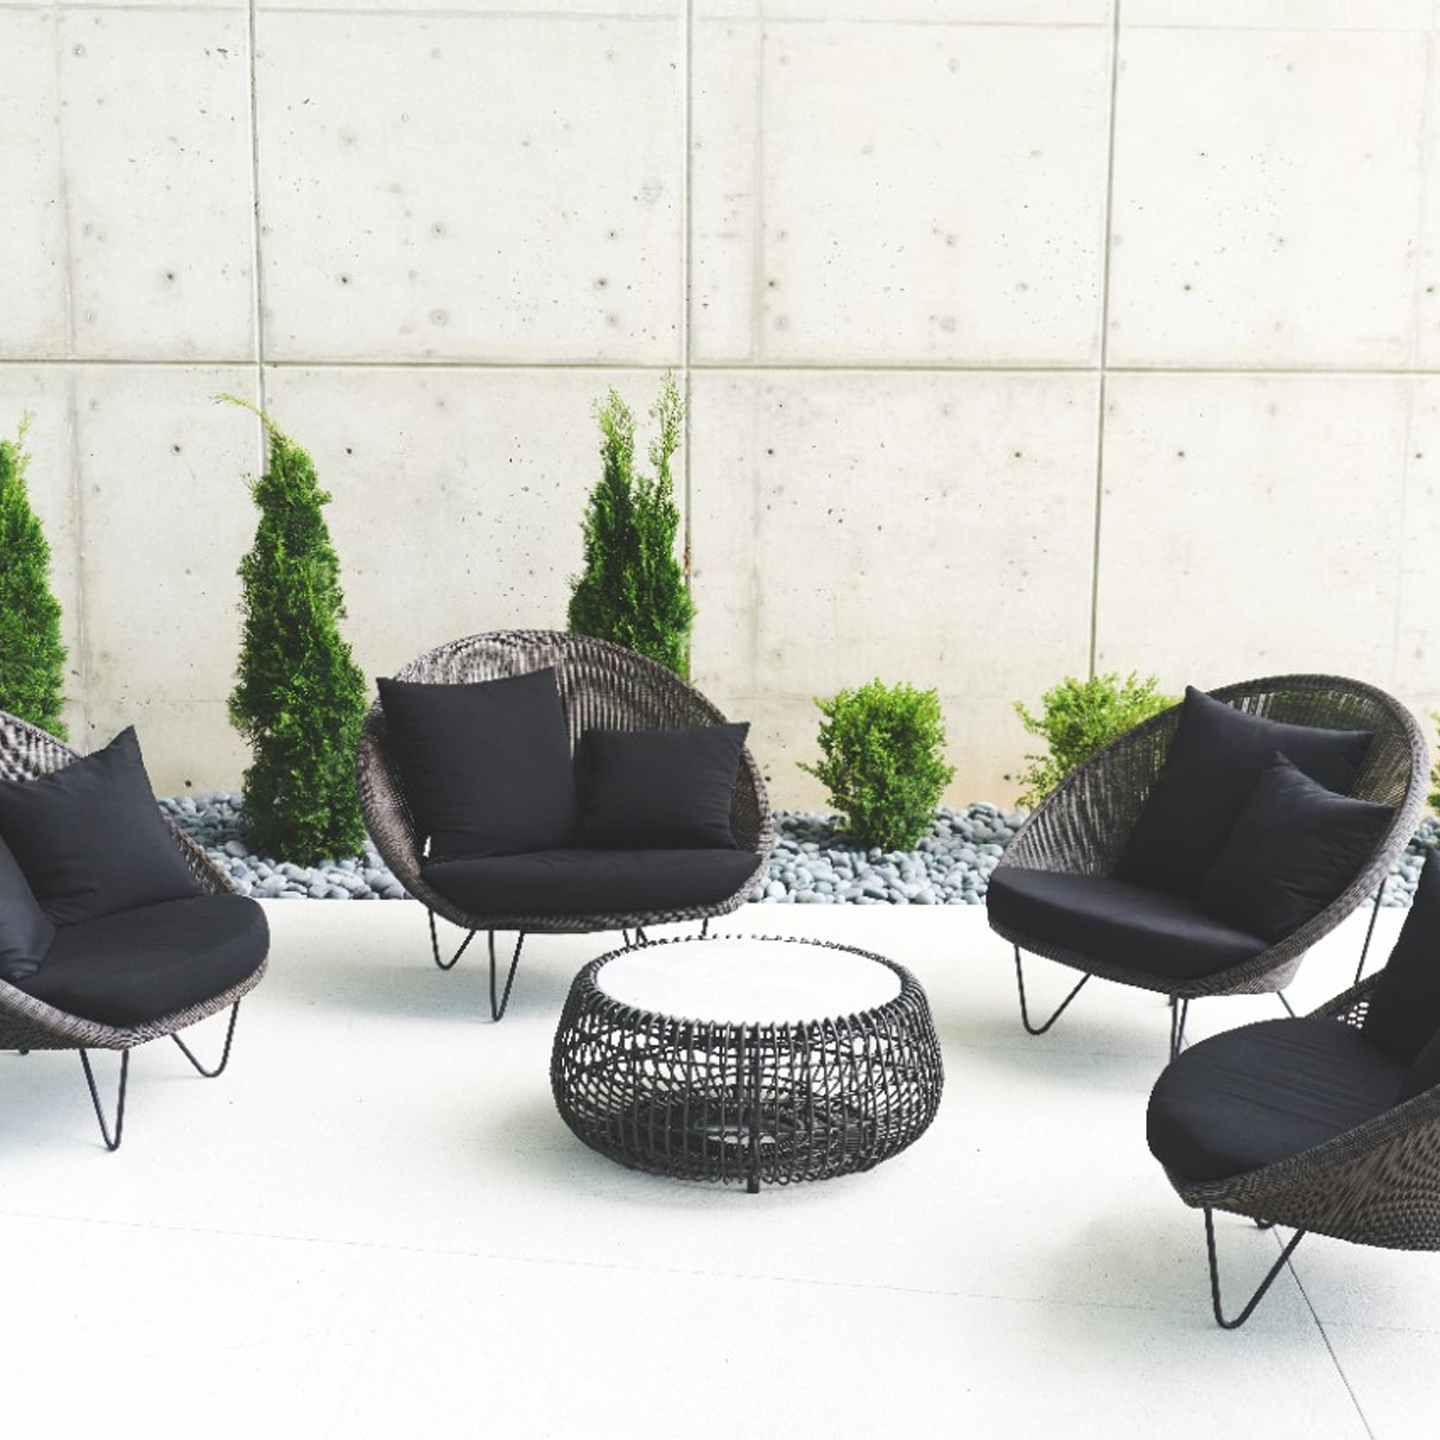 Haworth Gigi II lounge chairs in black cane material with black cushions in an outdoor space